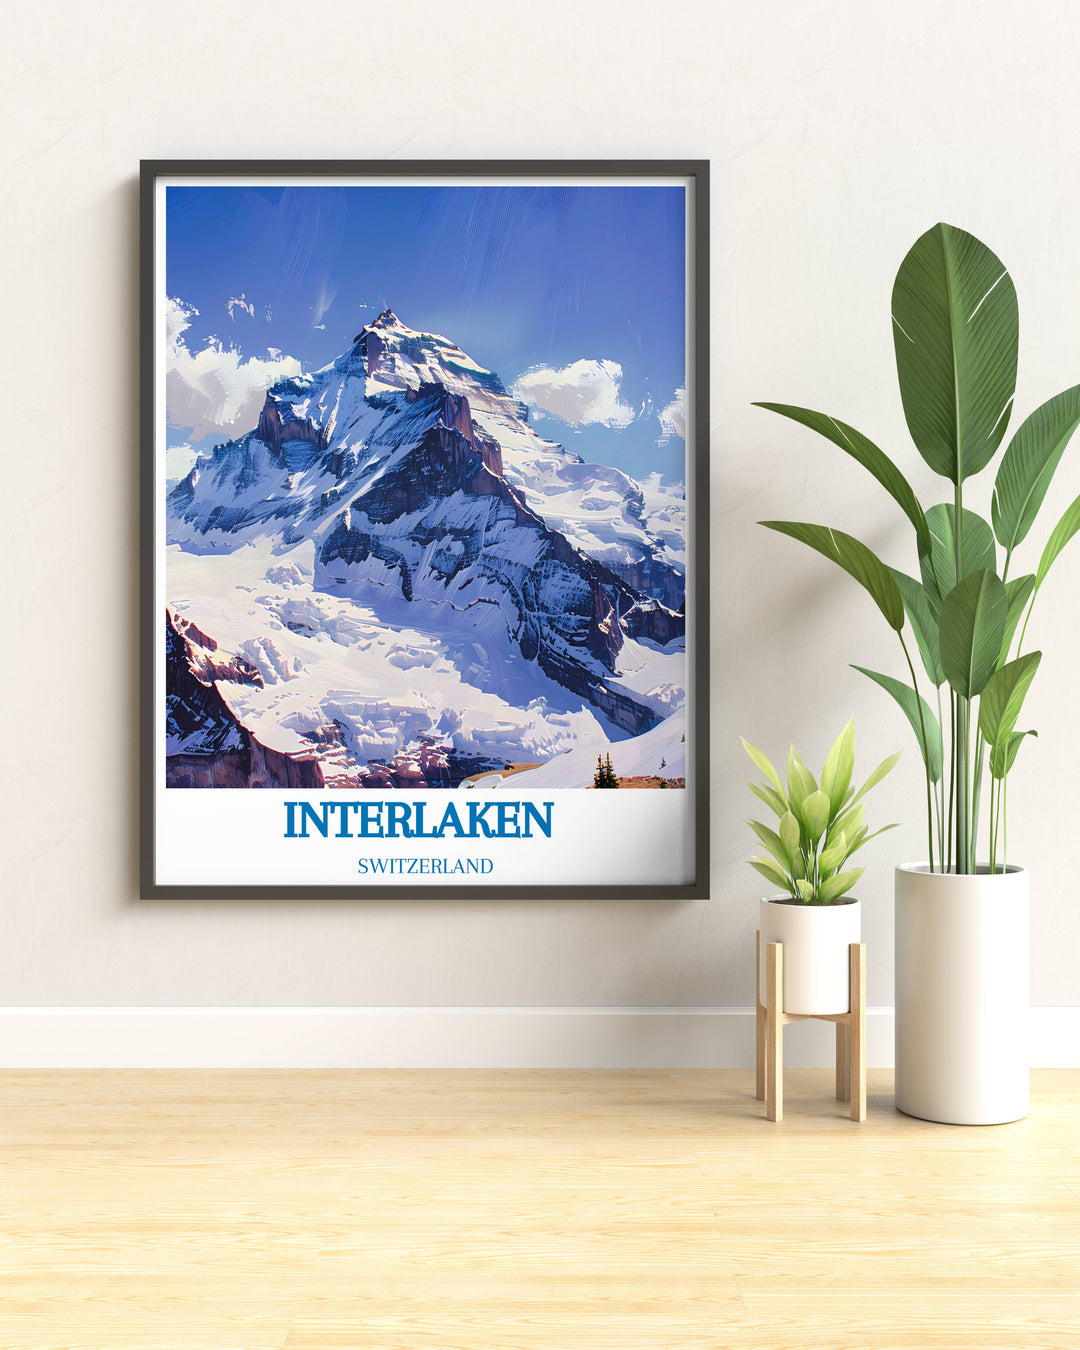 Travel poster of Jungfrau with vivid depiction of the Eiger and Monch peaks, perfect for adding a touch of Switzerland to any room